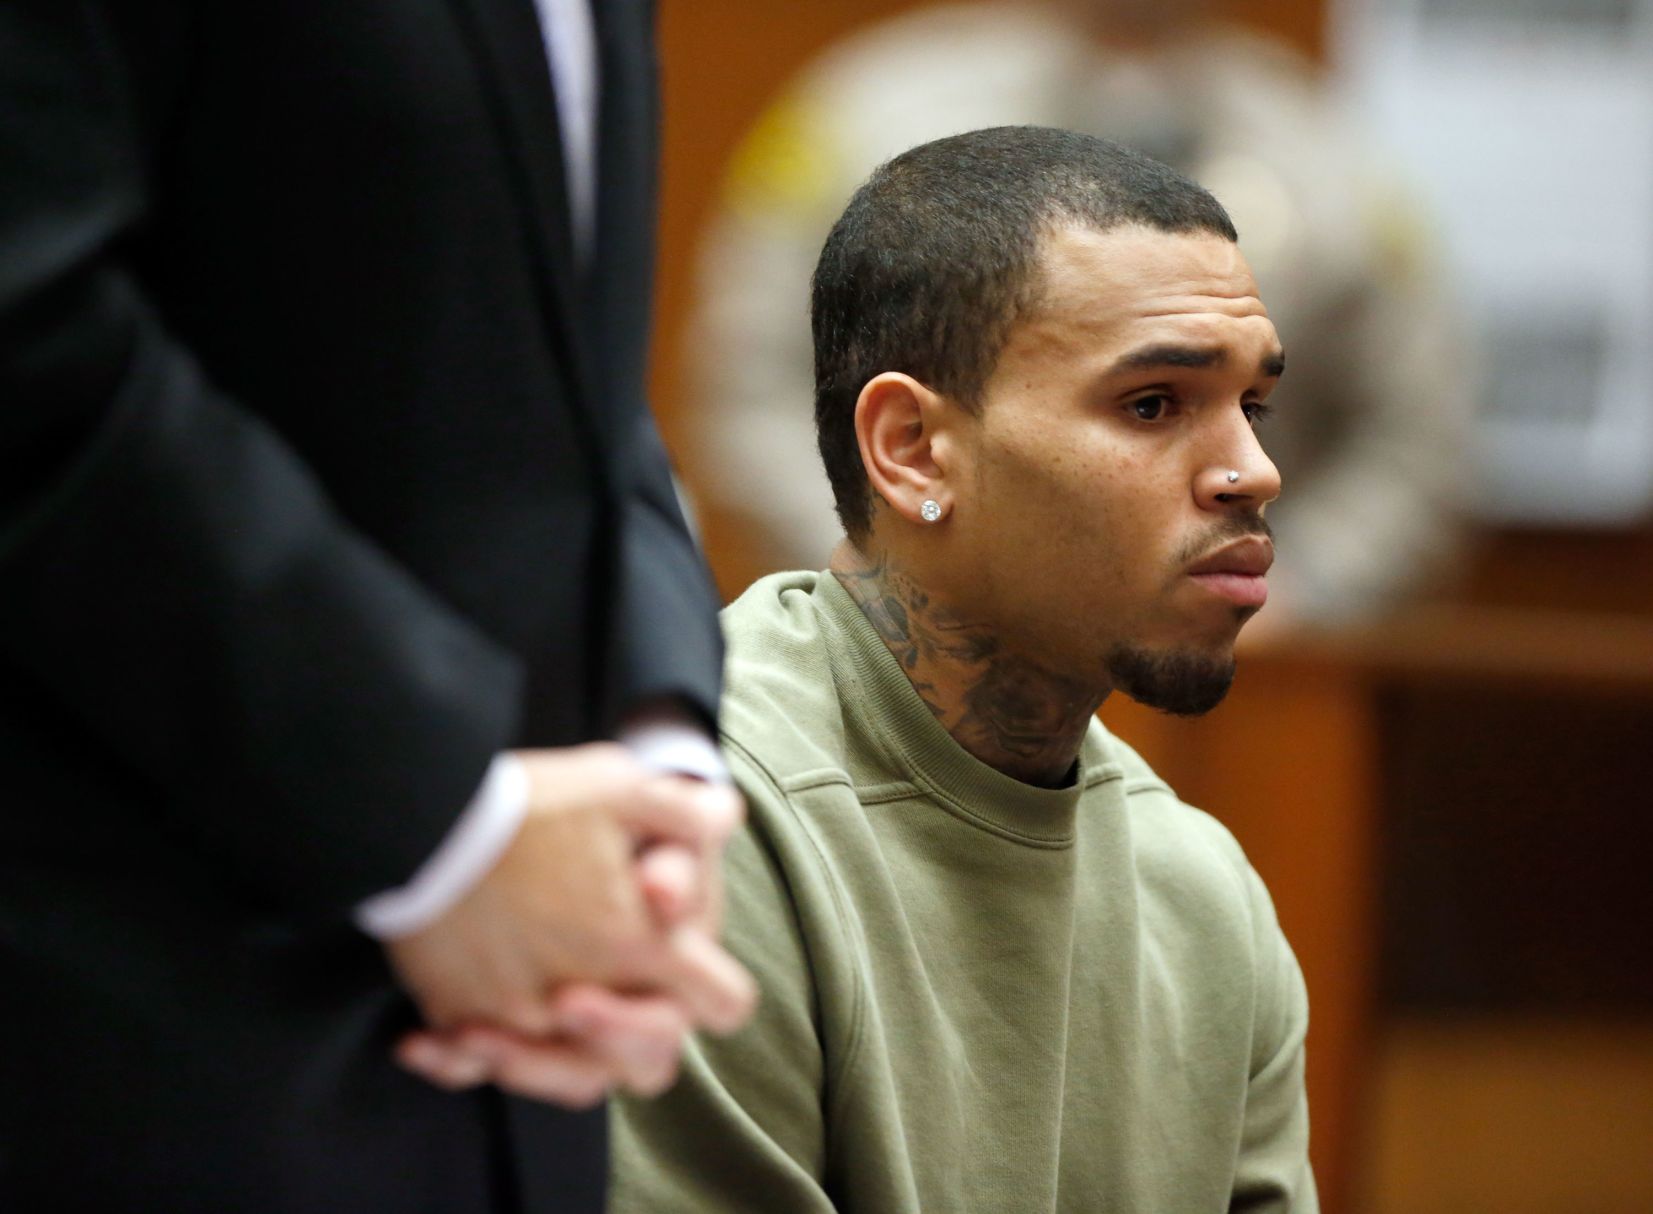 chris brown out of jail 2022